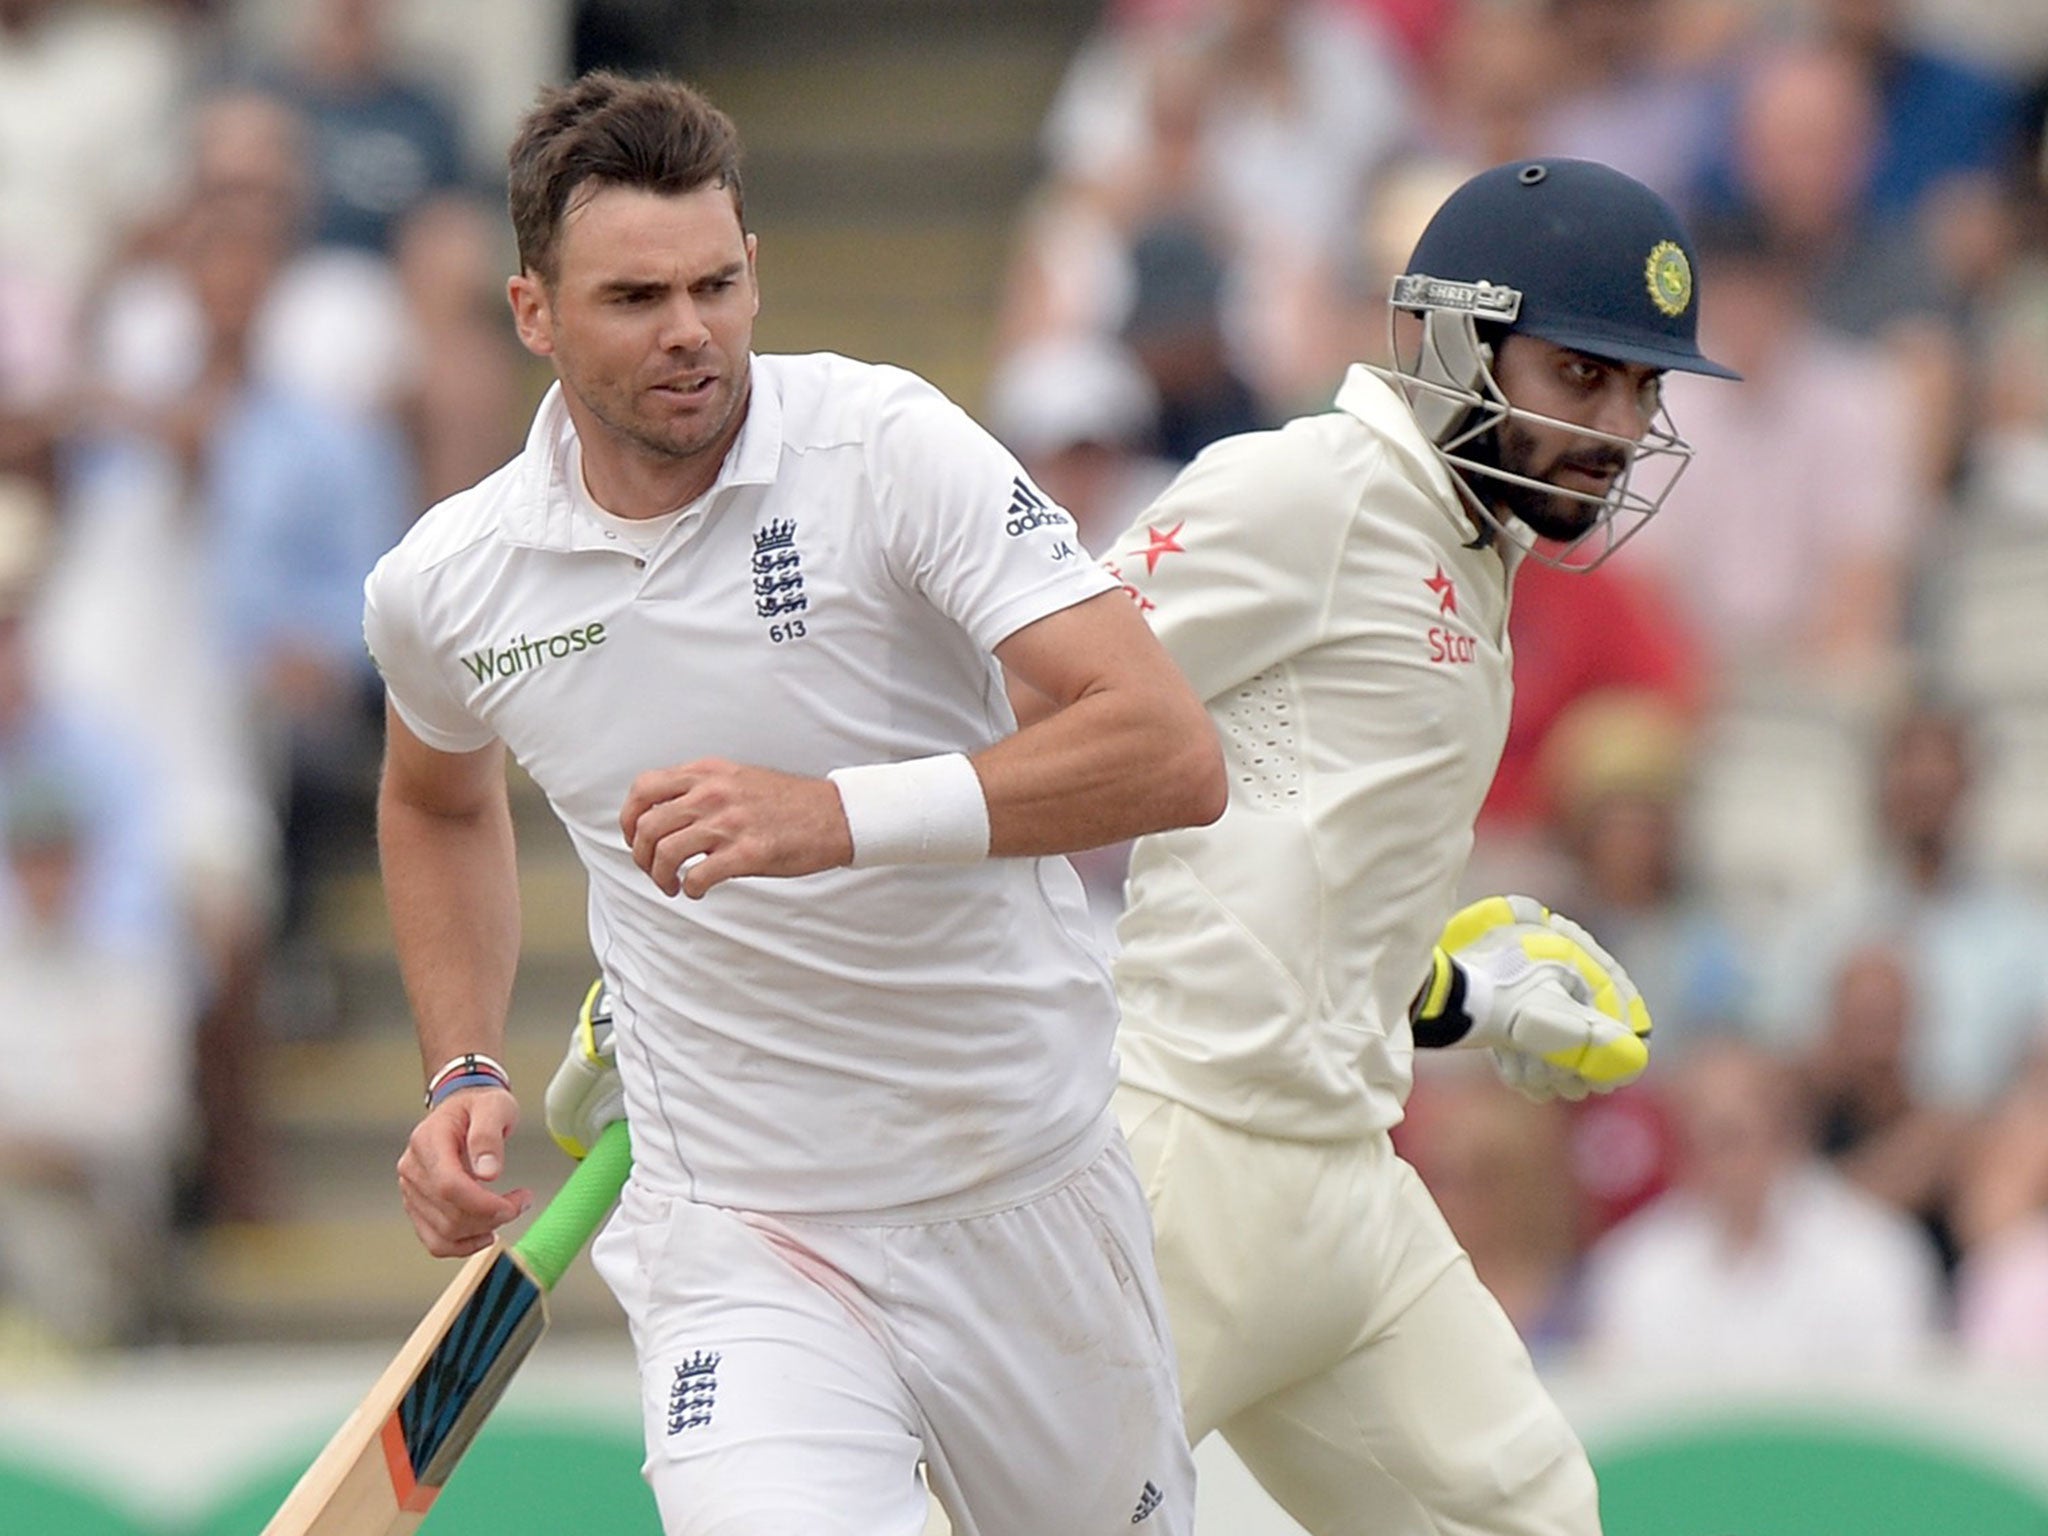 Jimmy Anderson and Ravindra Jadeja in action during this ill-tempered series